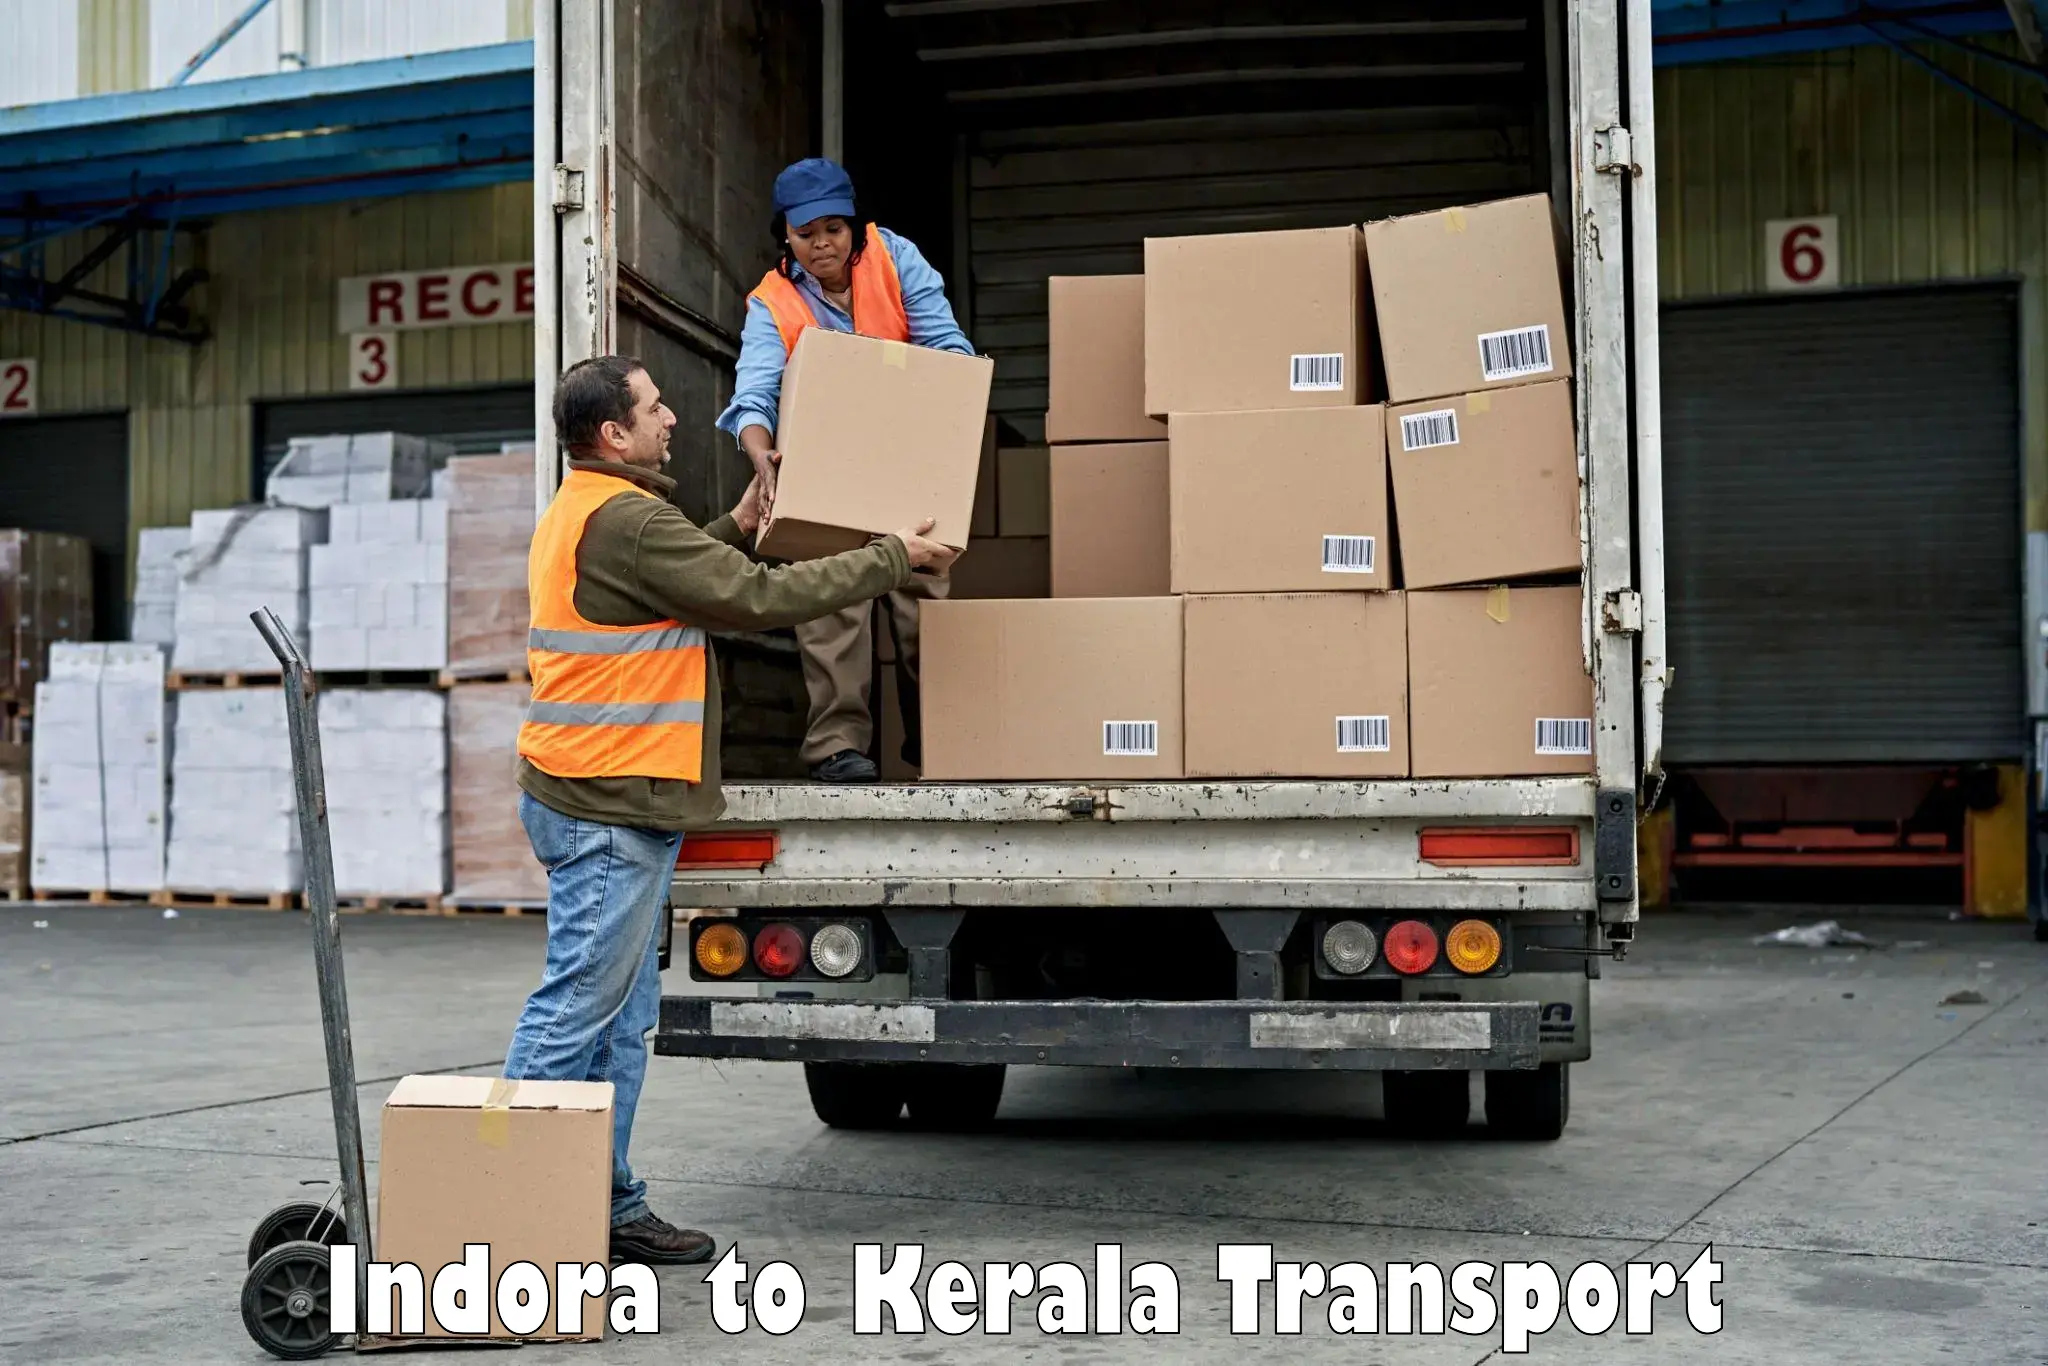 Delivery service Indora to Calicut